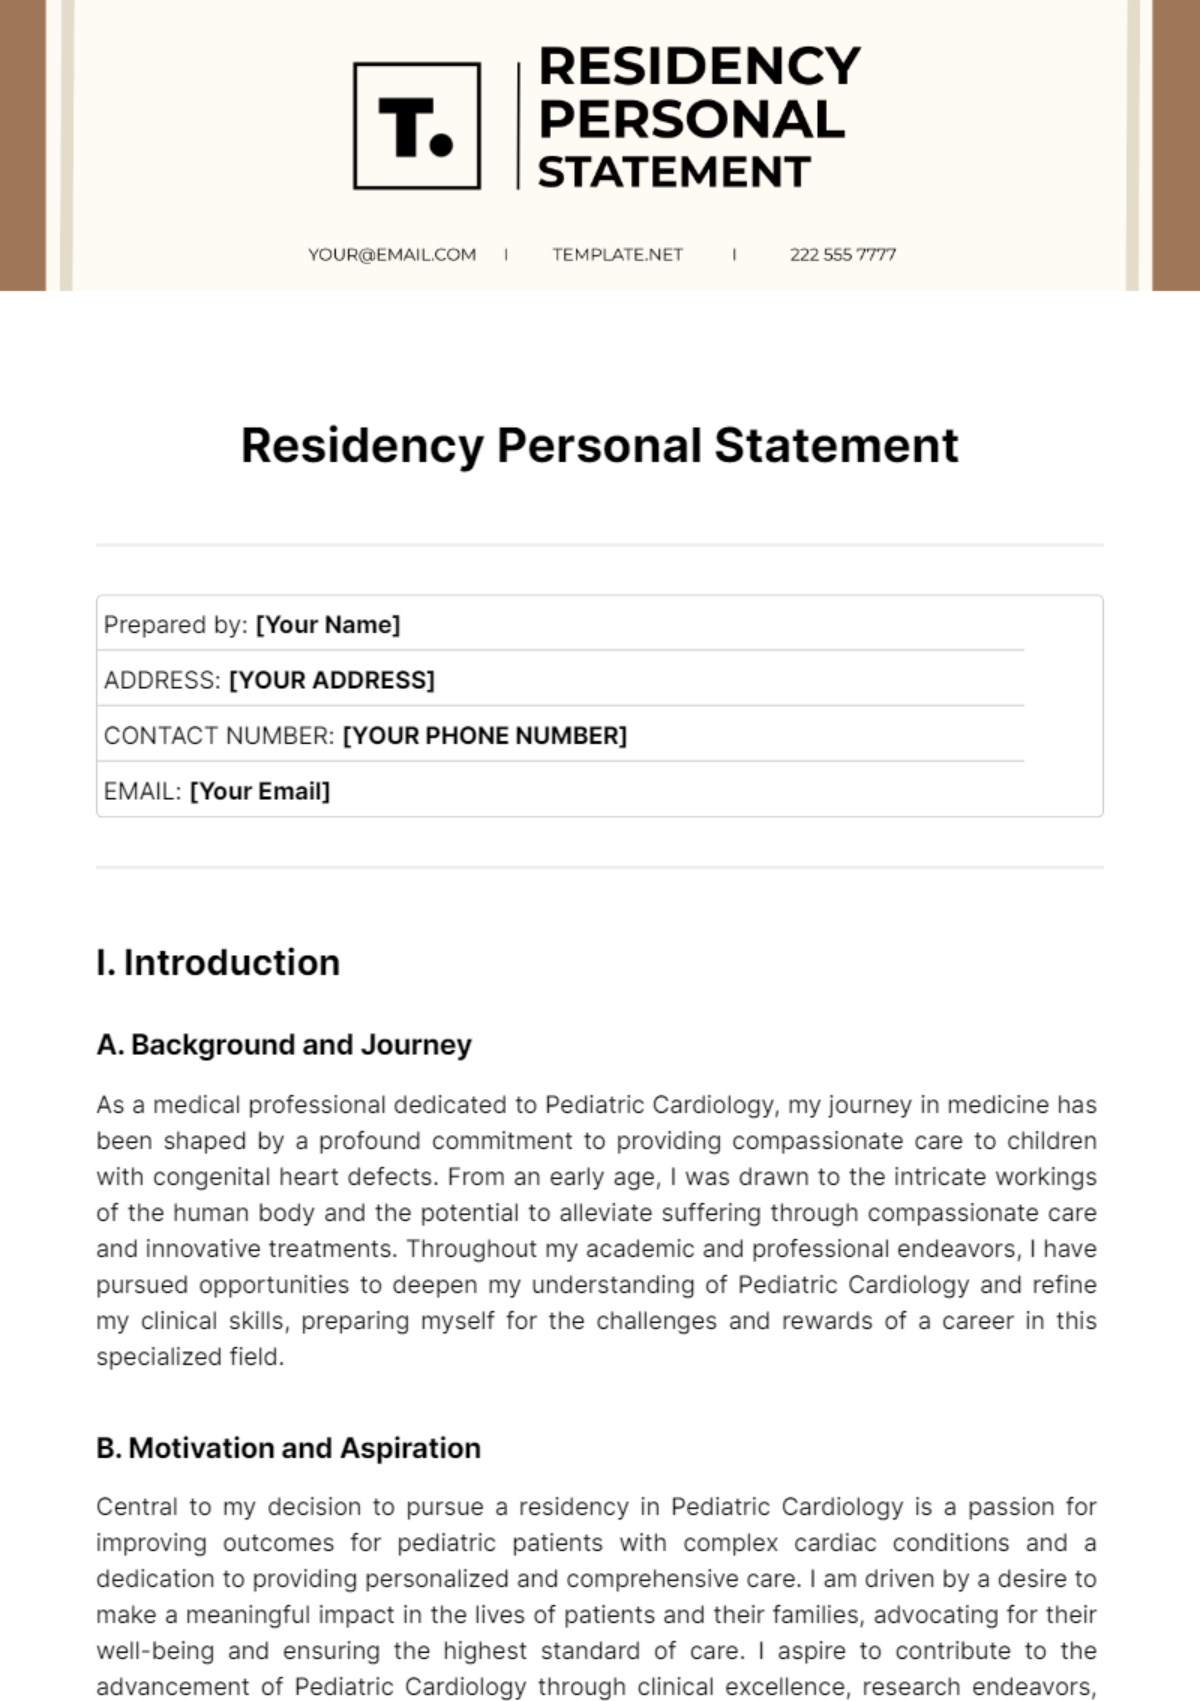 Residency Personal Statement Template